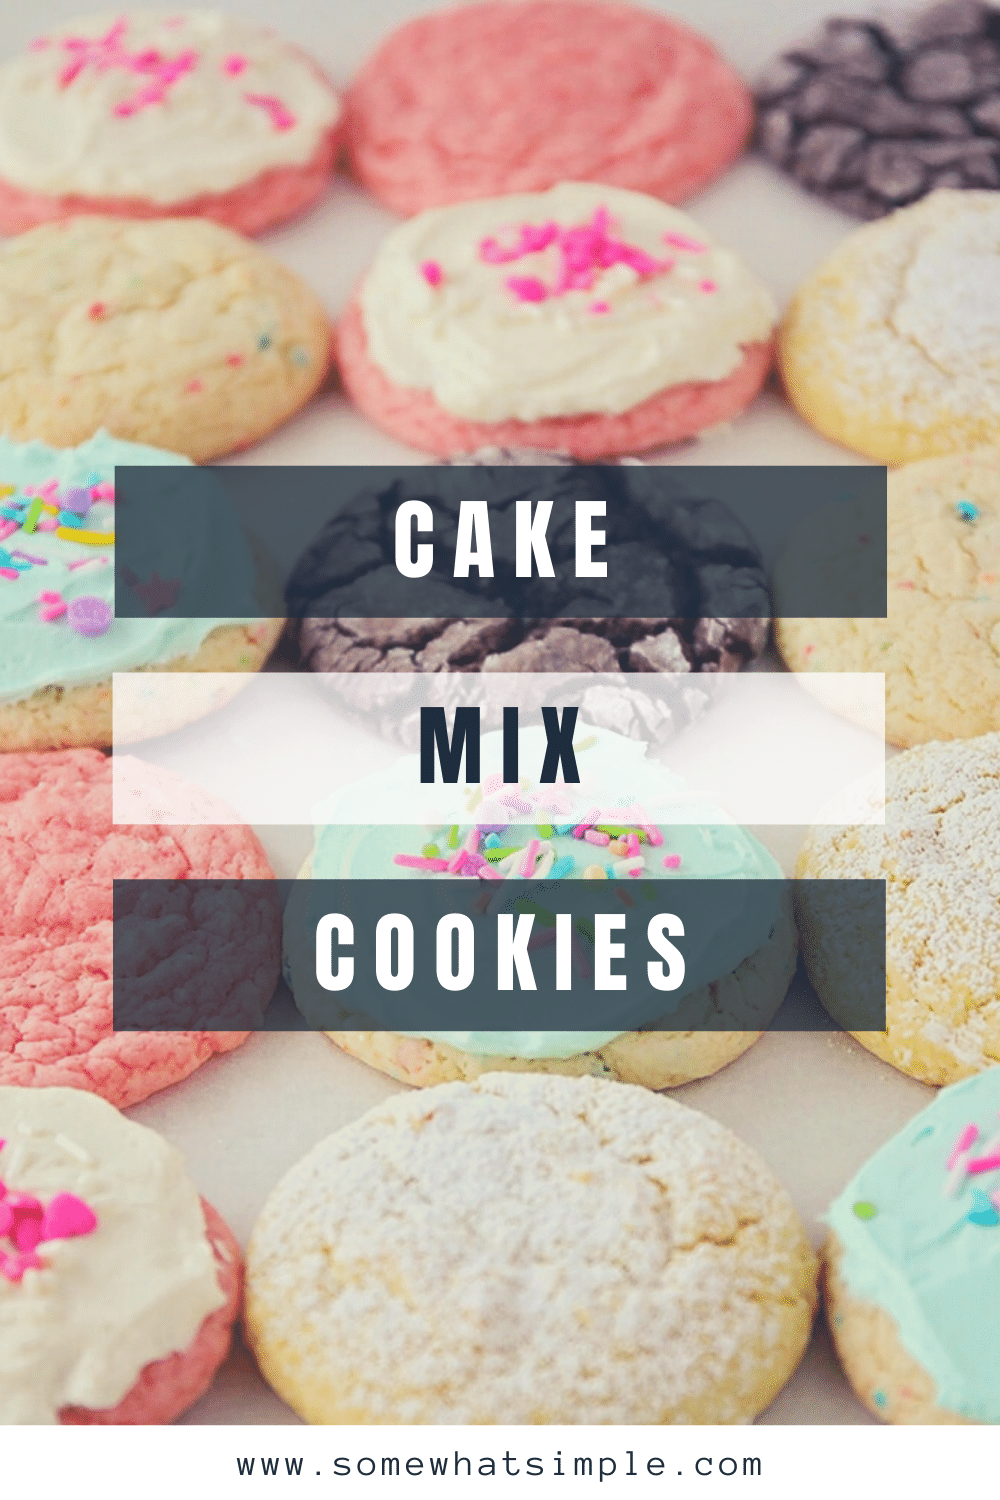 Cake mix cookies are soft and chewy and super delicious! Plus, they only require 3 ingredients making them essentially a no-fuss fantastic treat. This cookie recipe is so easy, it'll look and taste like you've been in the kitchen all day but they will only take you minutes to make. With 10 different flavors to choose from, you're going to find one you love! via @somewhatsimple